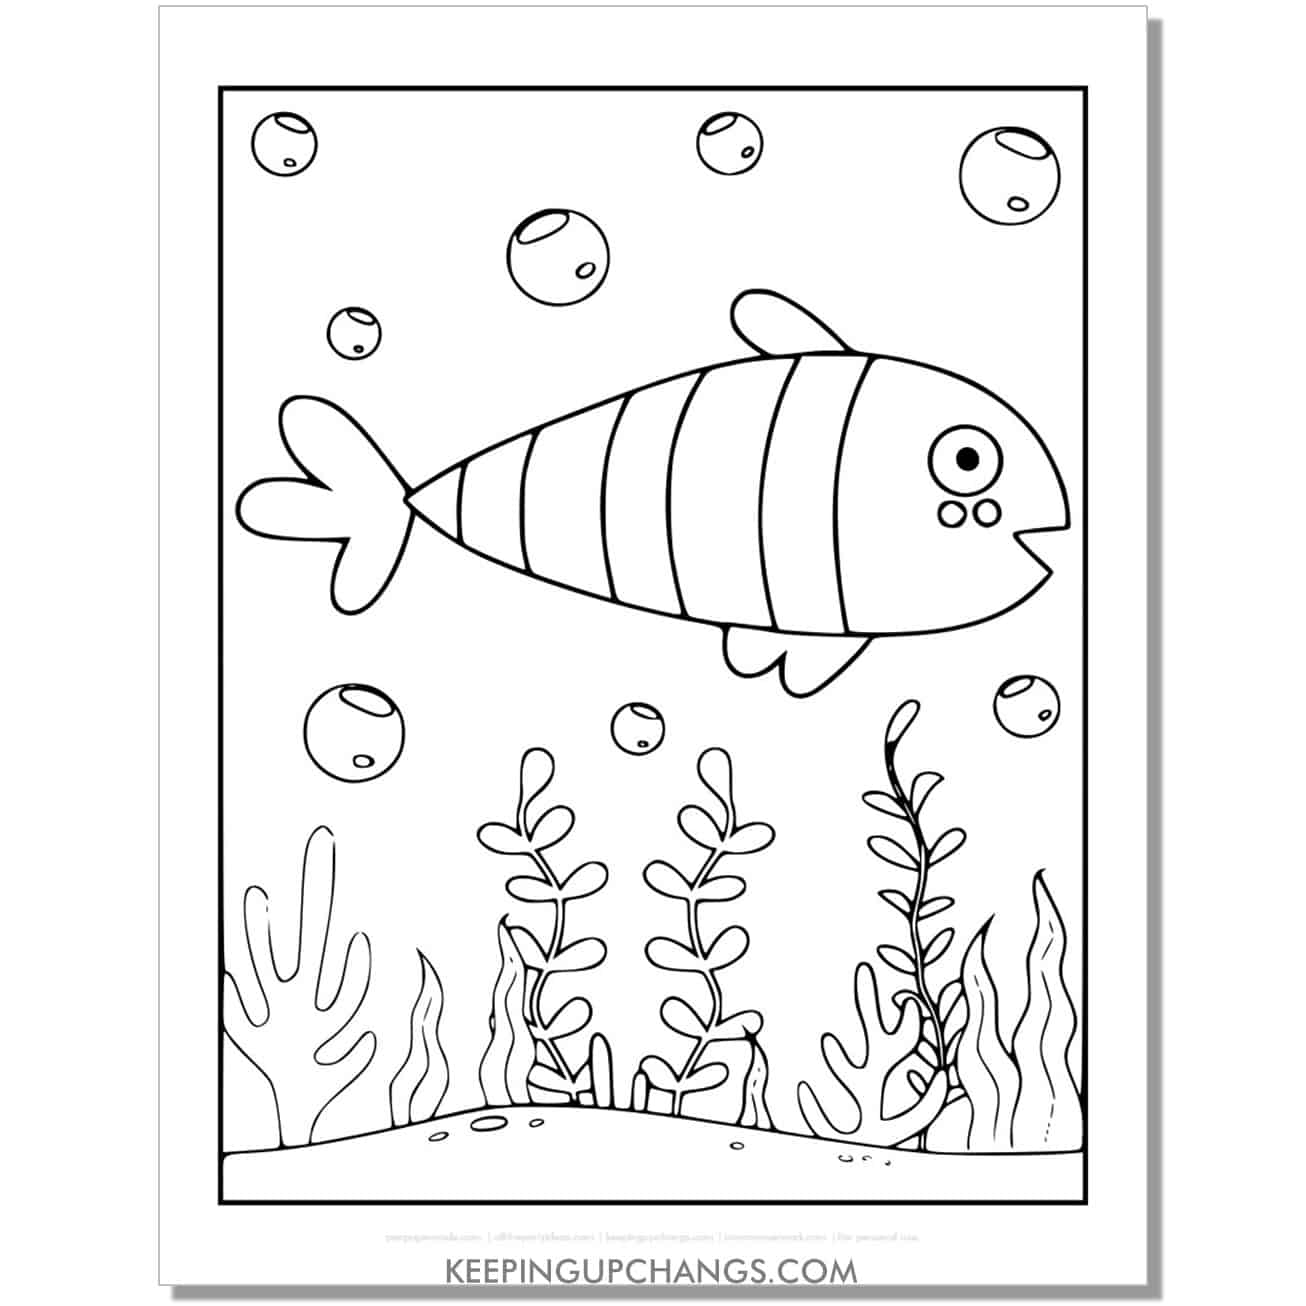 free full size striped fish coloring page, sheet.